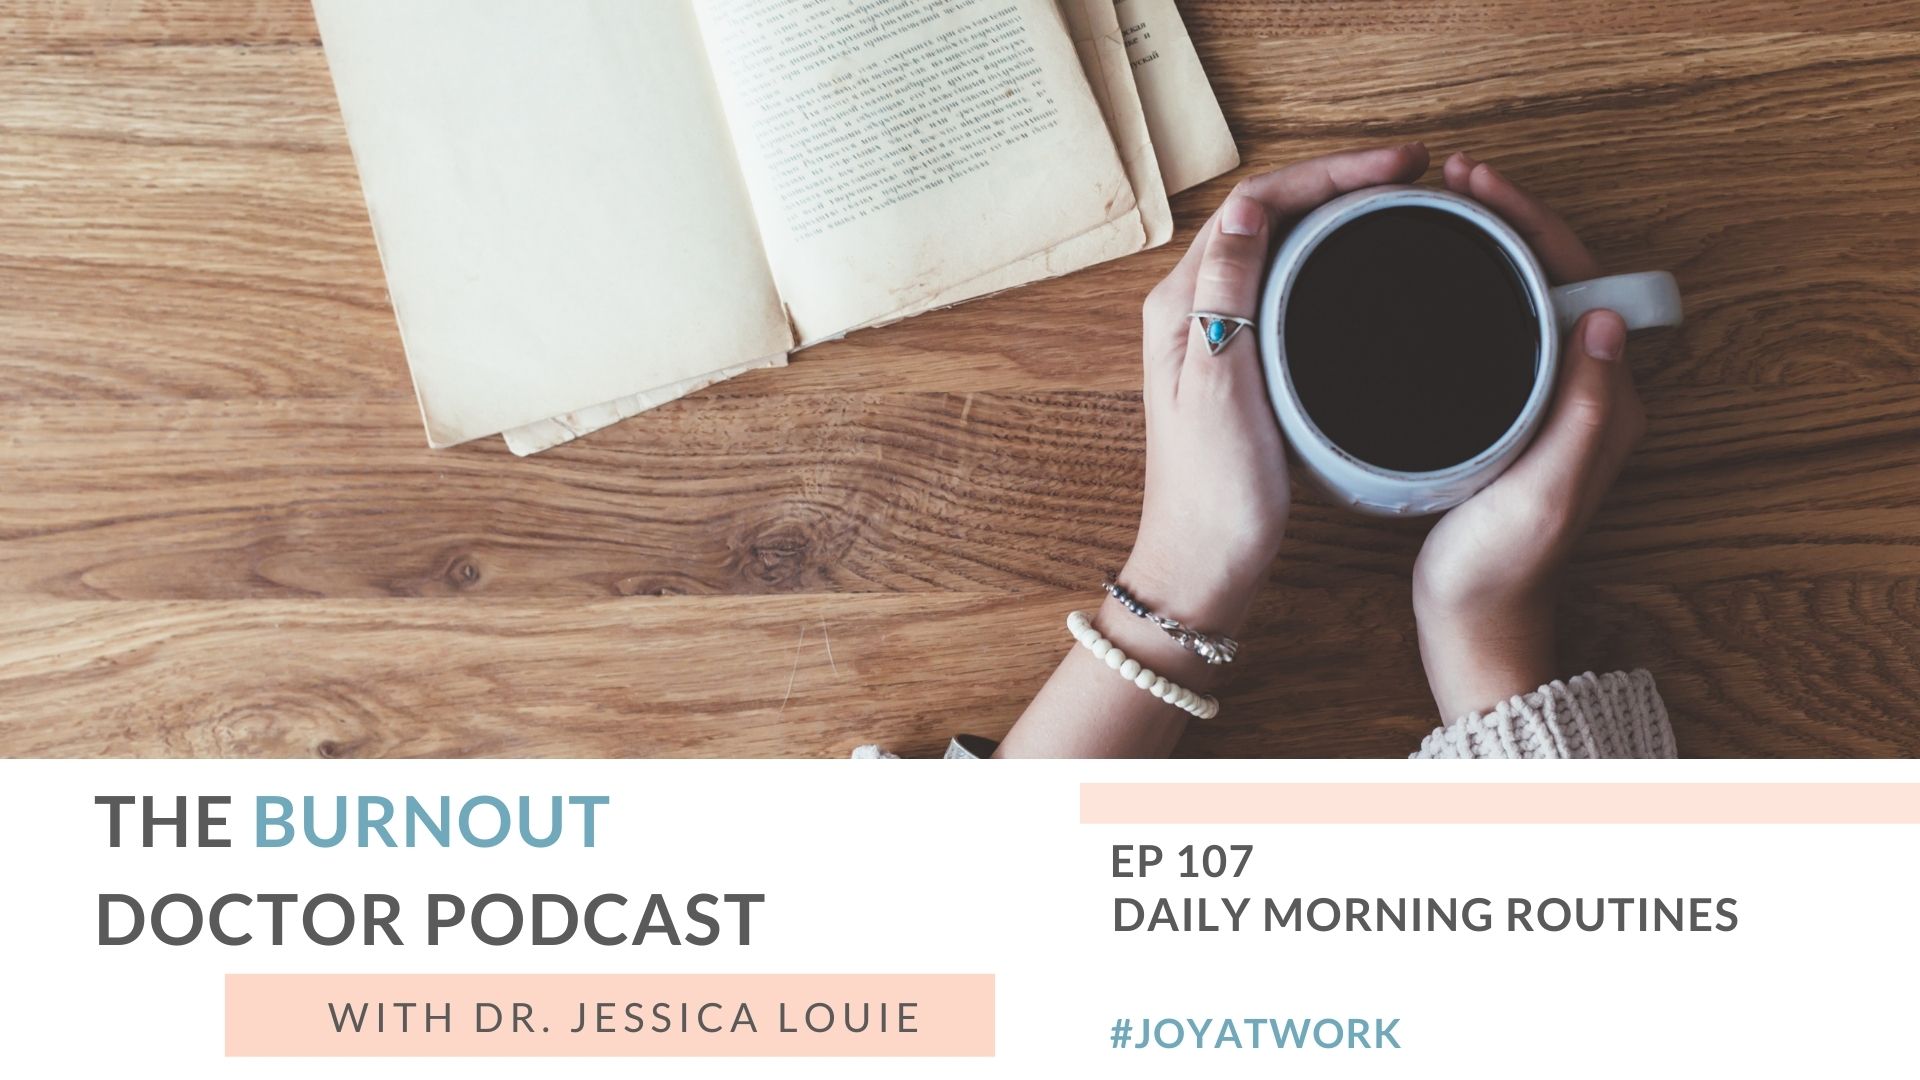 What is a daily morning routine to help pharmacist burnout or to help healthcare burnout. How to start a daily morning routine. Keynote speaker on burnout, simplifying and well-being with Dr. Jessica Louie. Clarify Simplify Align and The Burnout Doctor Podcast.